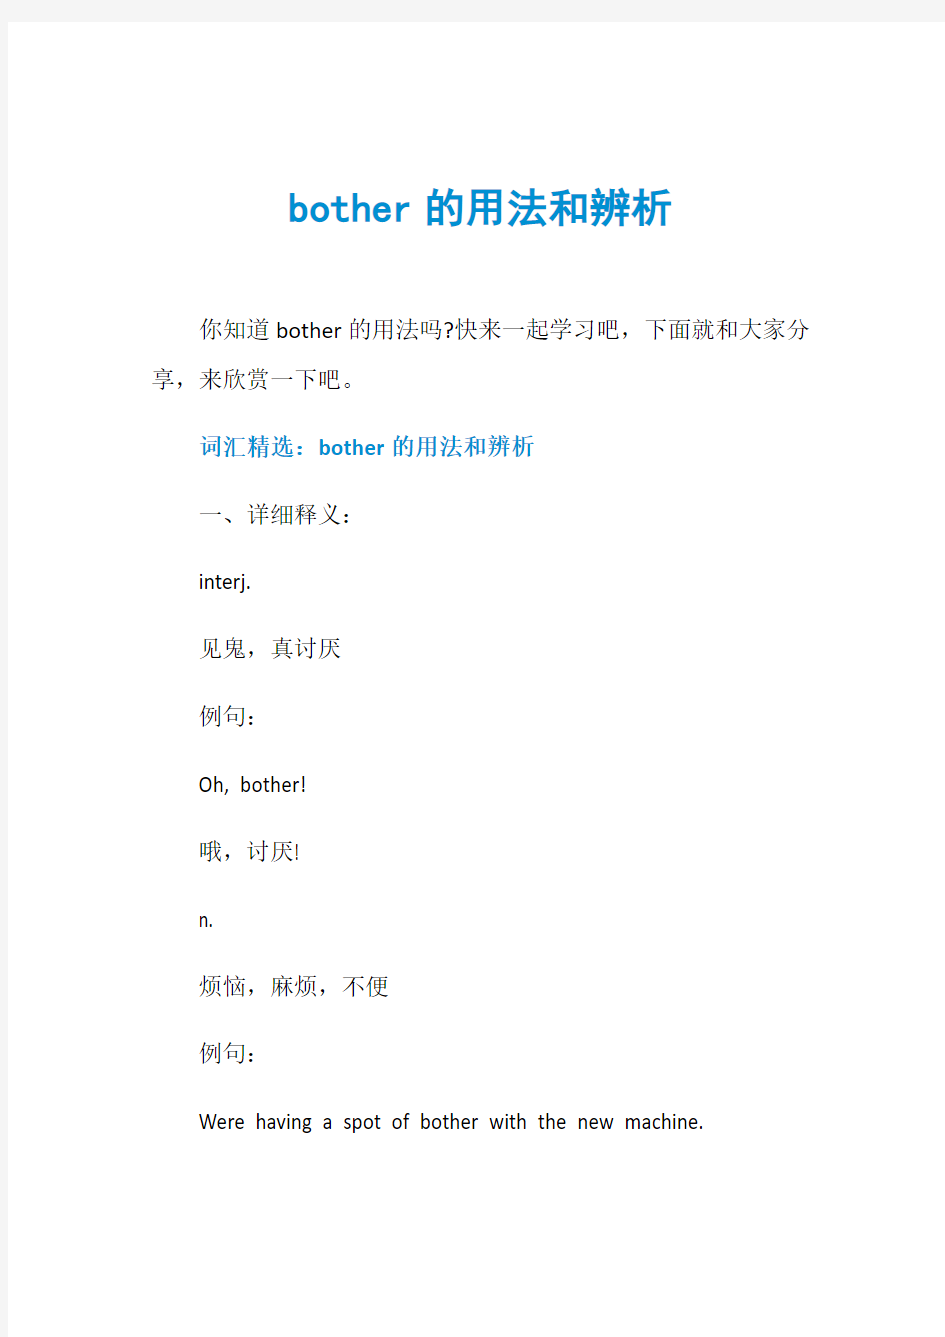 bother的用法和辨析